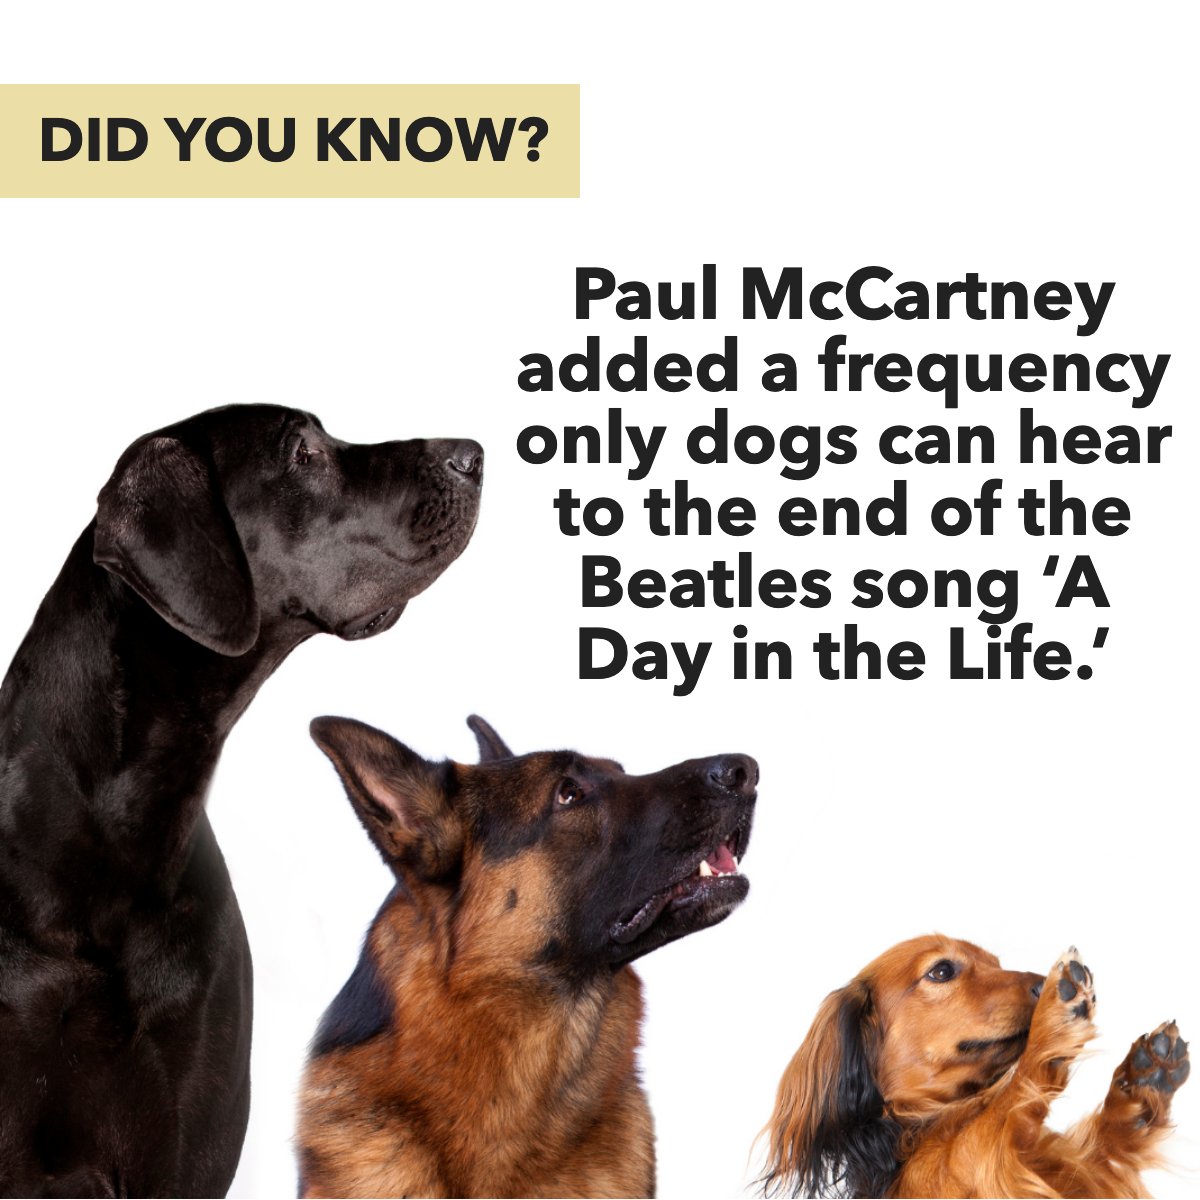 Who knows, your dog may even become a fan, as the high frequency 15 kilohertz sound can be detected by canines but not the human ear. 😜

#music #love #dogs #doglovers 
 #FarmandHouseChik #realtor #sellinghomes #buyingahome #NoVaRealEstate